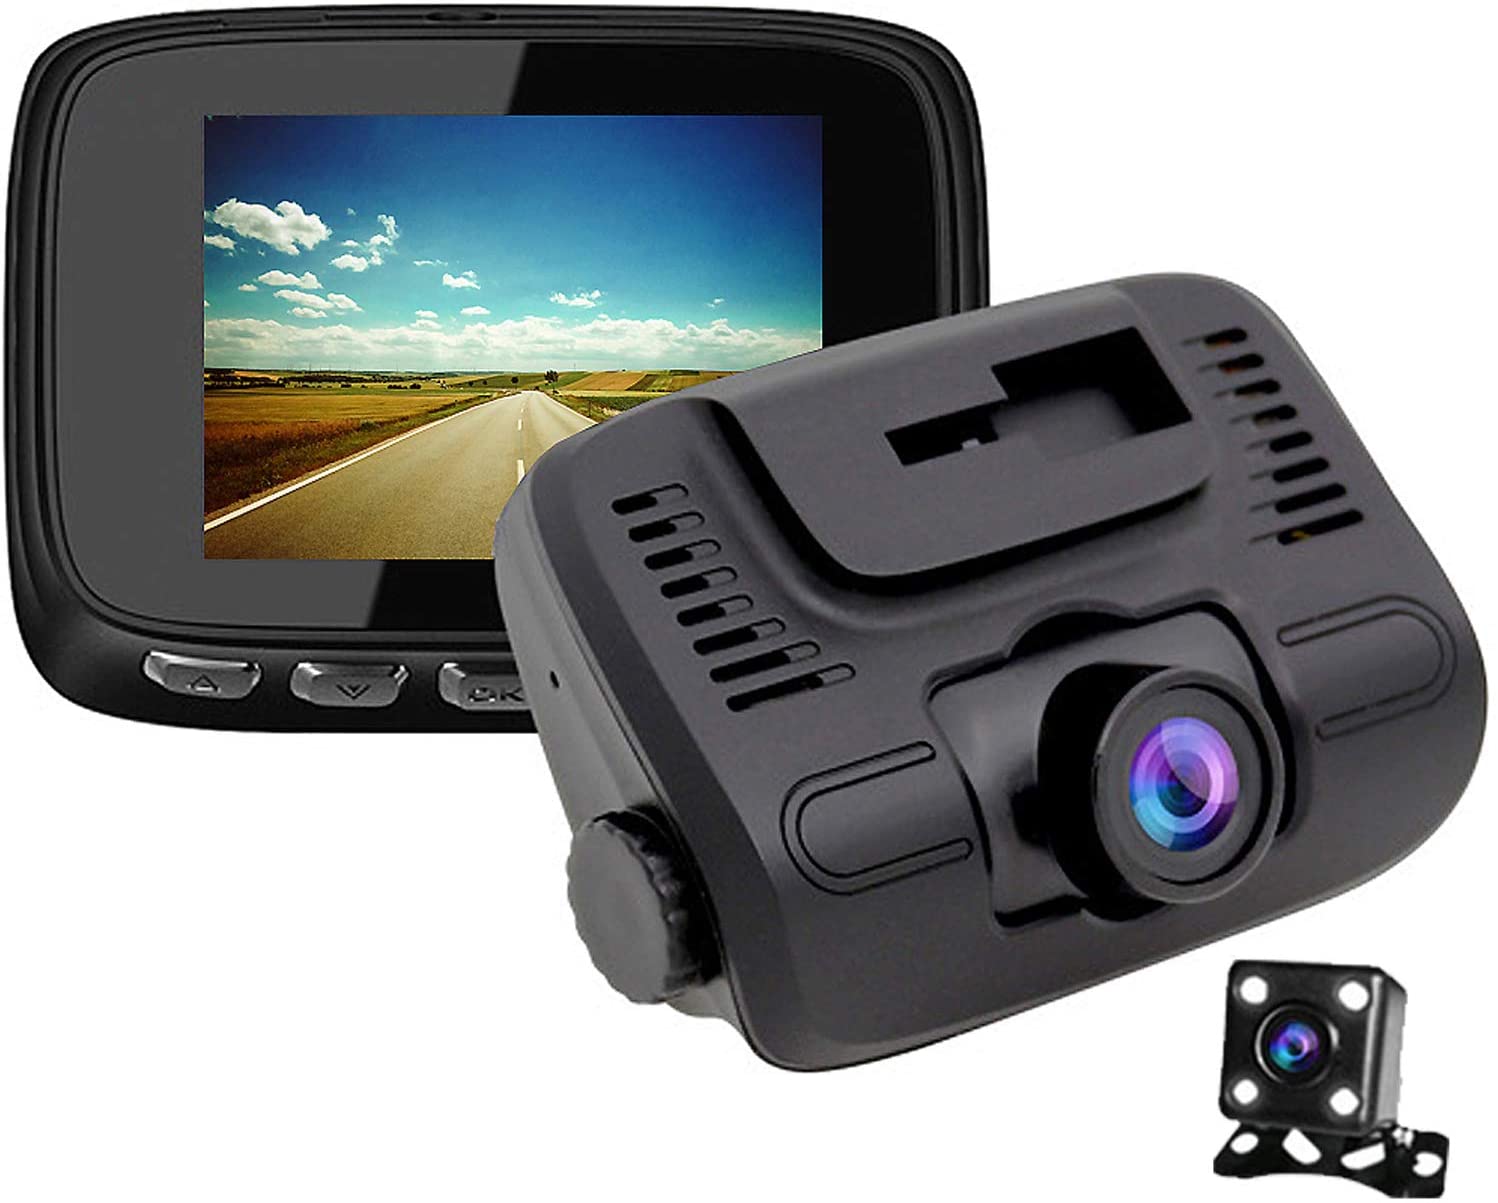 Dash Cam Driving Recorder 140°Wide Angle Lens Discreet Design Video Recorder with G-Sensor, Loop Recording, Motion Detection,Parking Monitoring